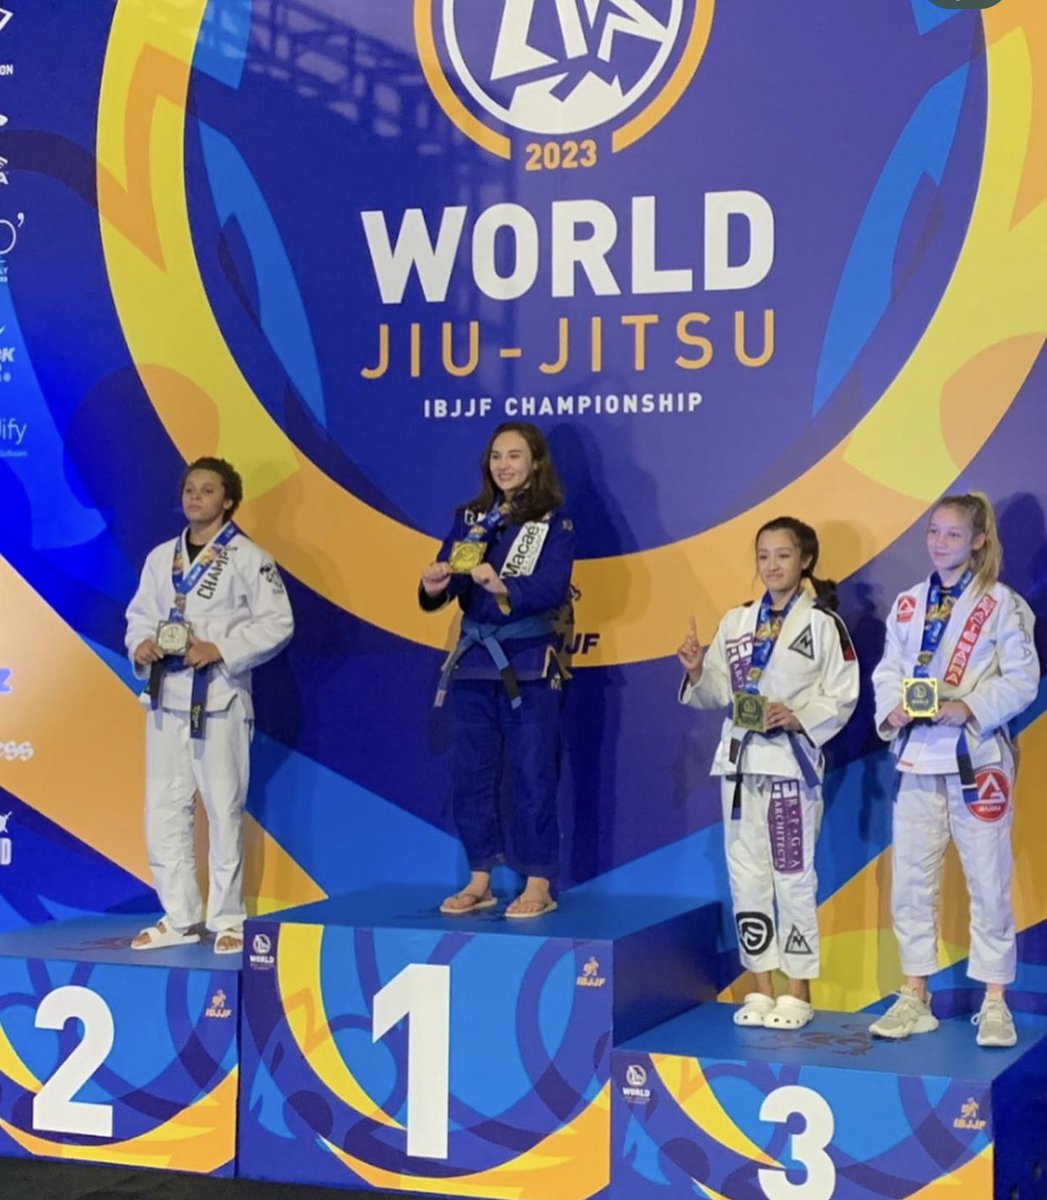 The @ibjjf 2023 worlds is a wrap. As always, spectacular matches and energy. Congrats to all the athletes, coaches, the federation and the audience for keeping it the way it is. My shout out to the @GracieBarra72 representatives who left it all on the matsmy direct students or no